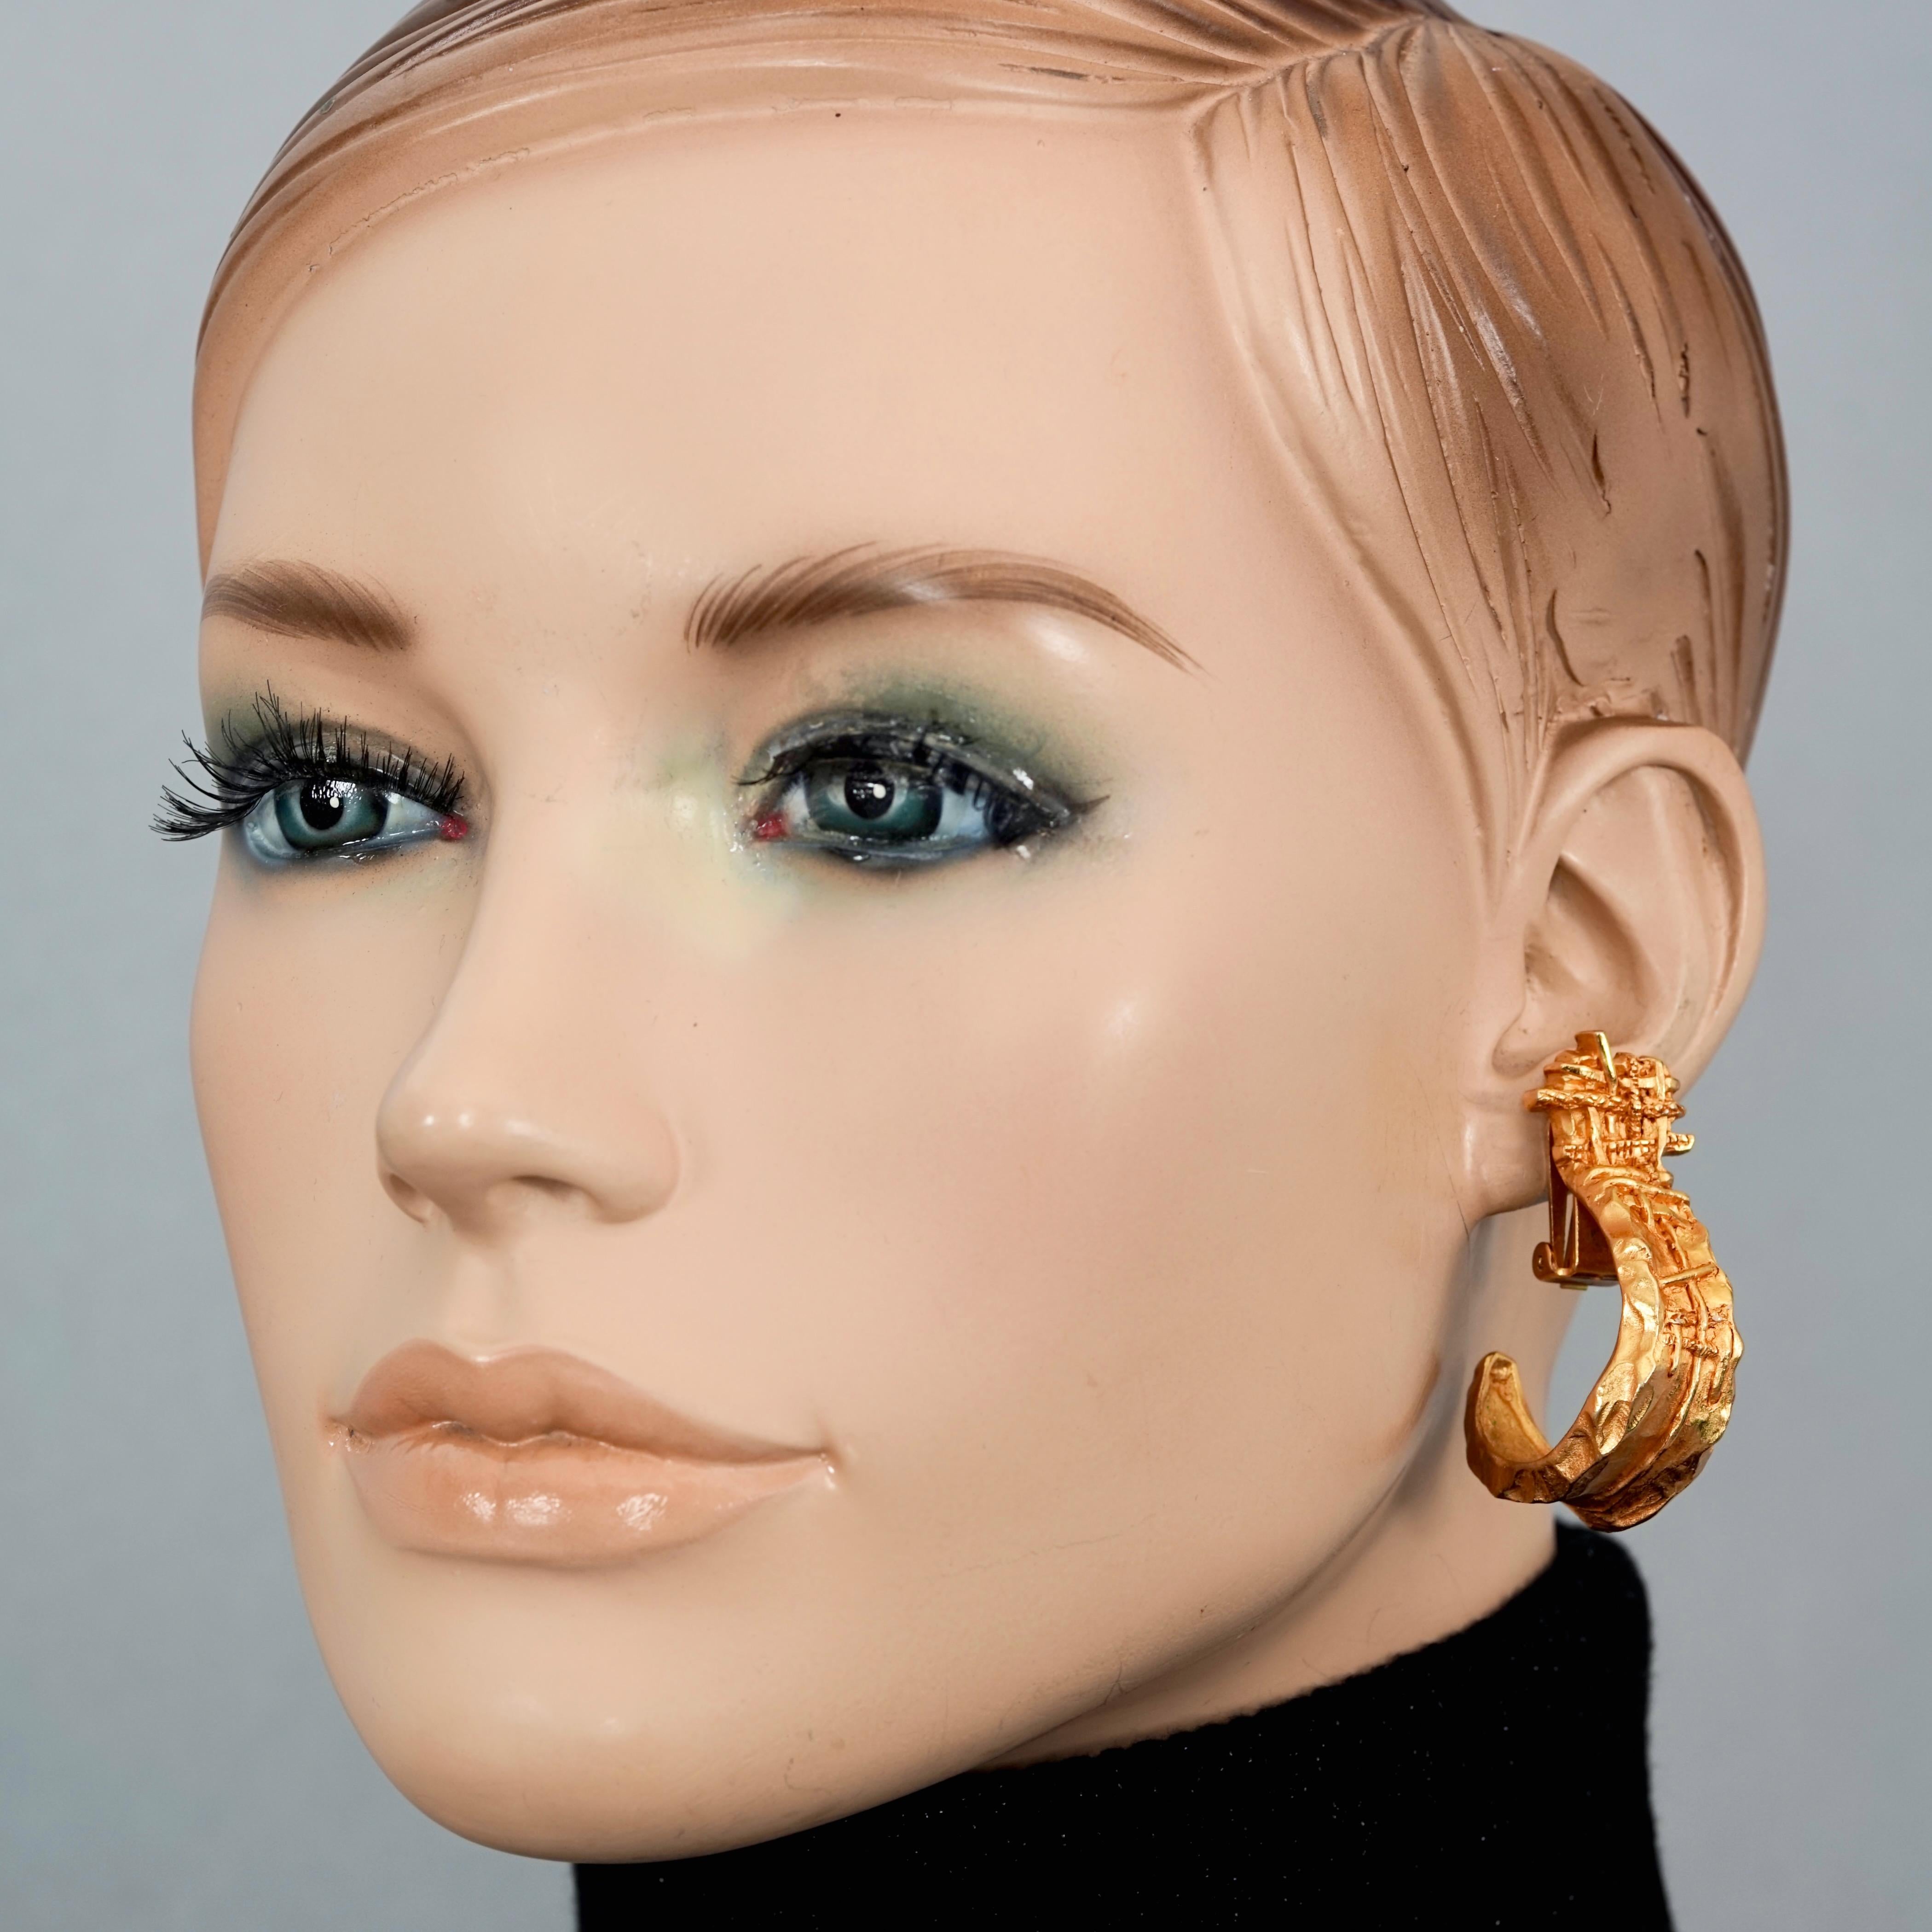 Vintage CHRISTIAN LACROIX Abstract Demi Creole Hoop Earrings

Measurements:
Height: 1.89 inches (4.8 inches)
Width: 0.63 inch (1.6 inches)
Weight per Earring: 19 grams

Features:
- 100% Authentic CHRISTIAN LACROIX.
- Hammered textured demi creole